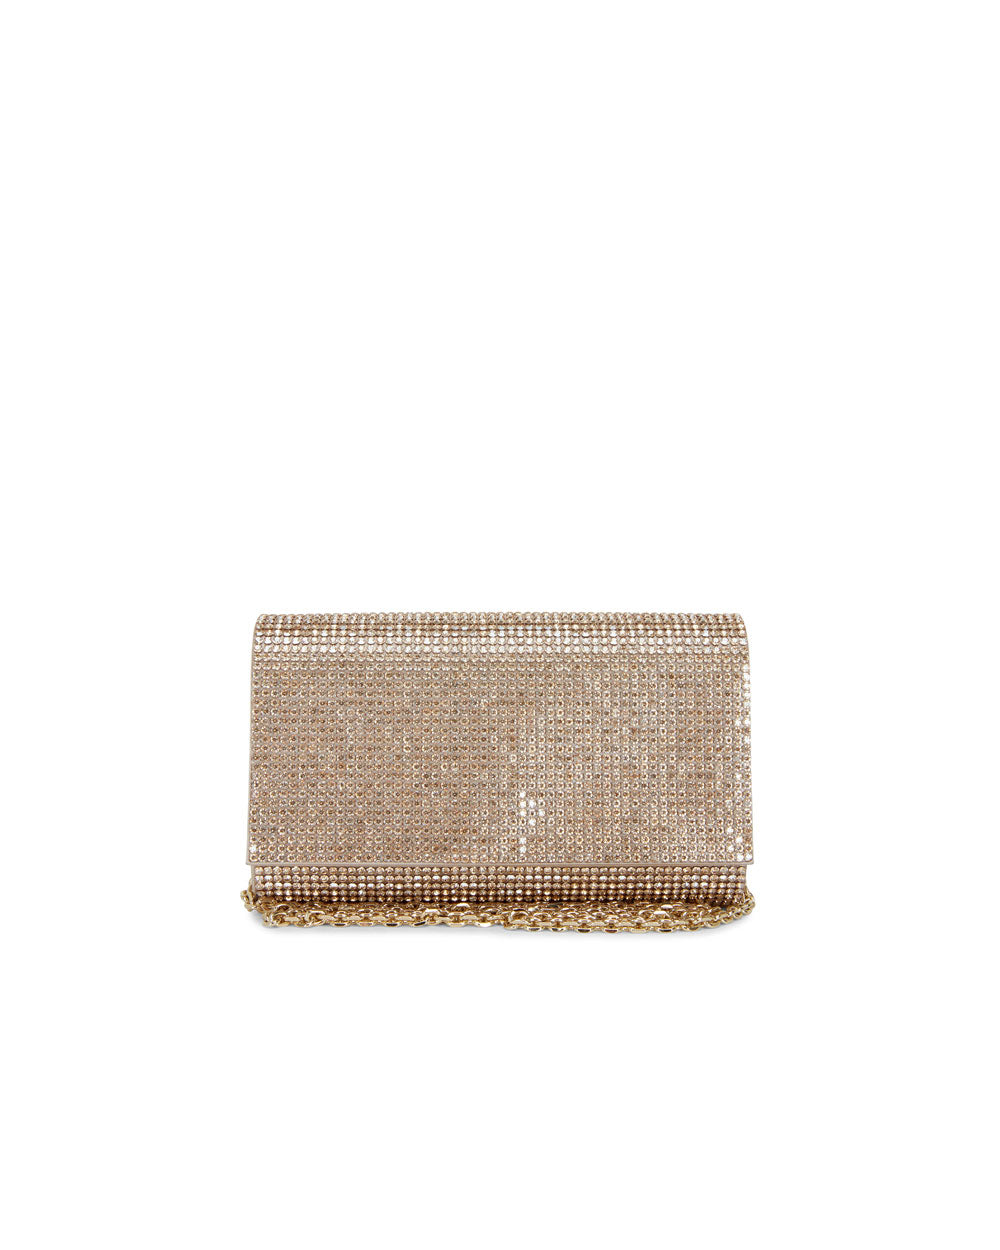 Fizzy Clutch in Champagne